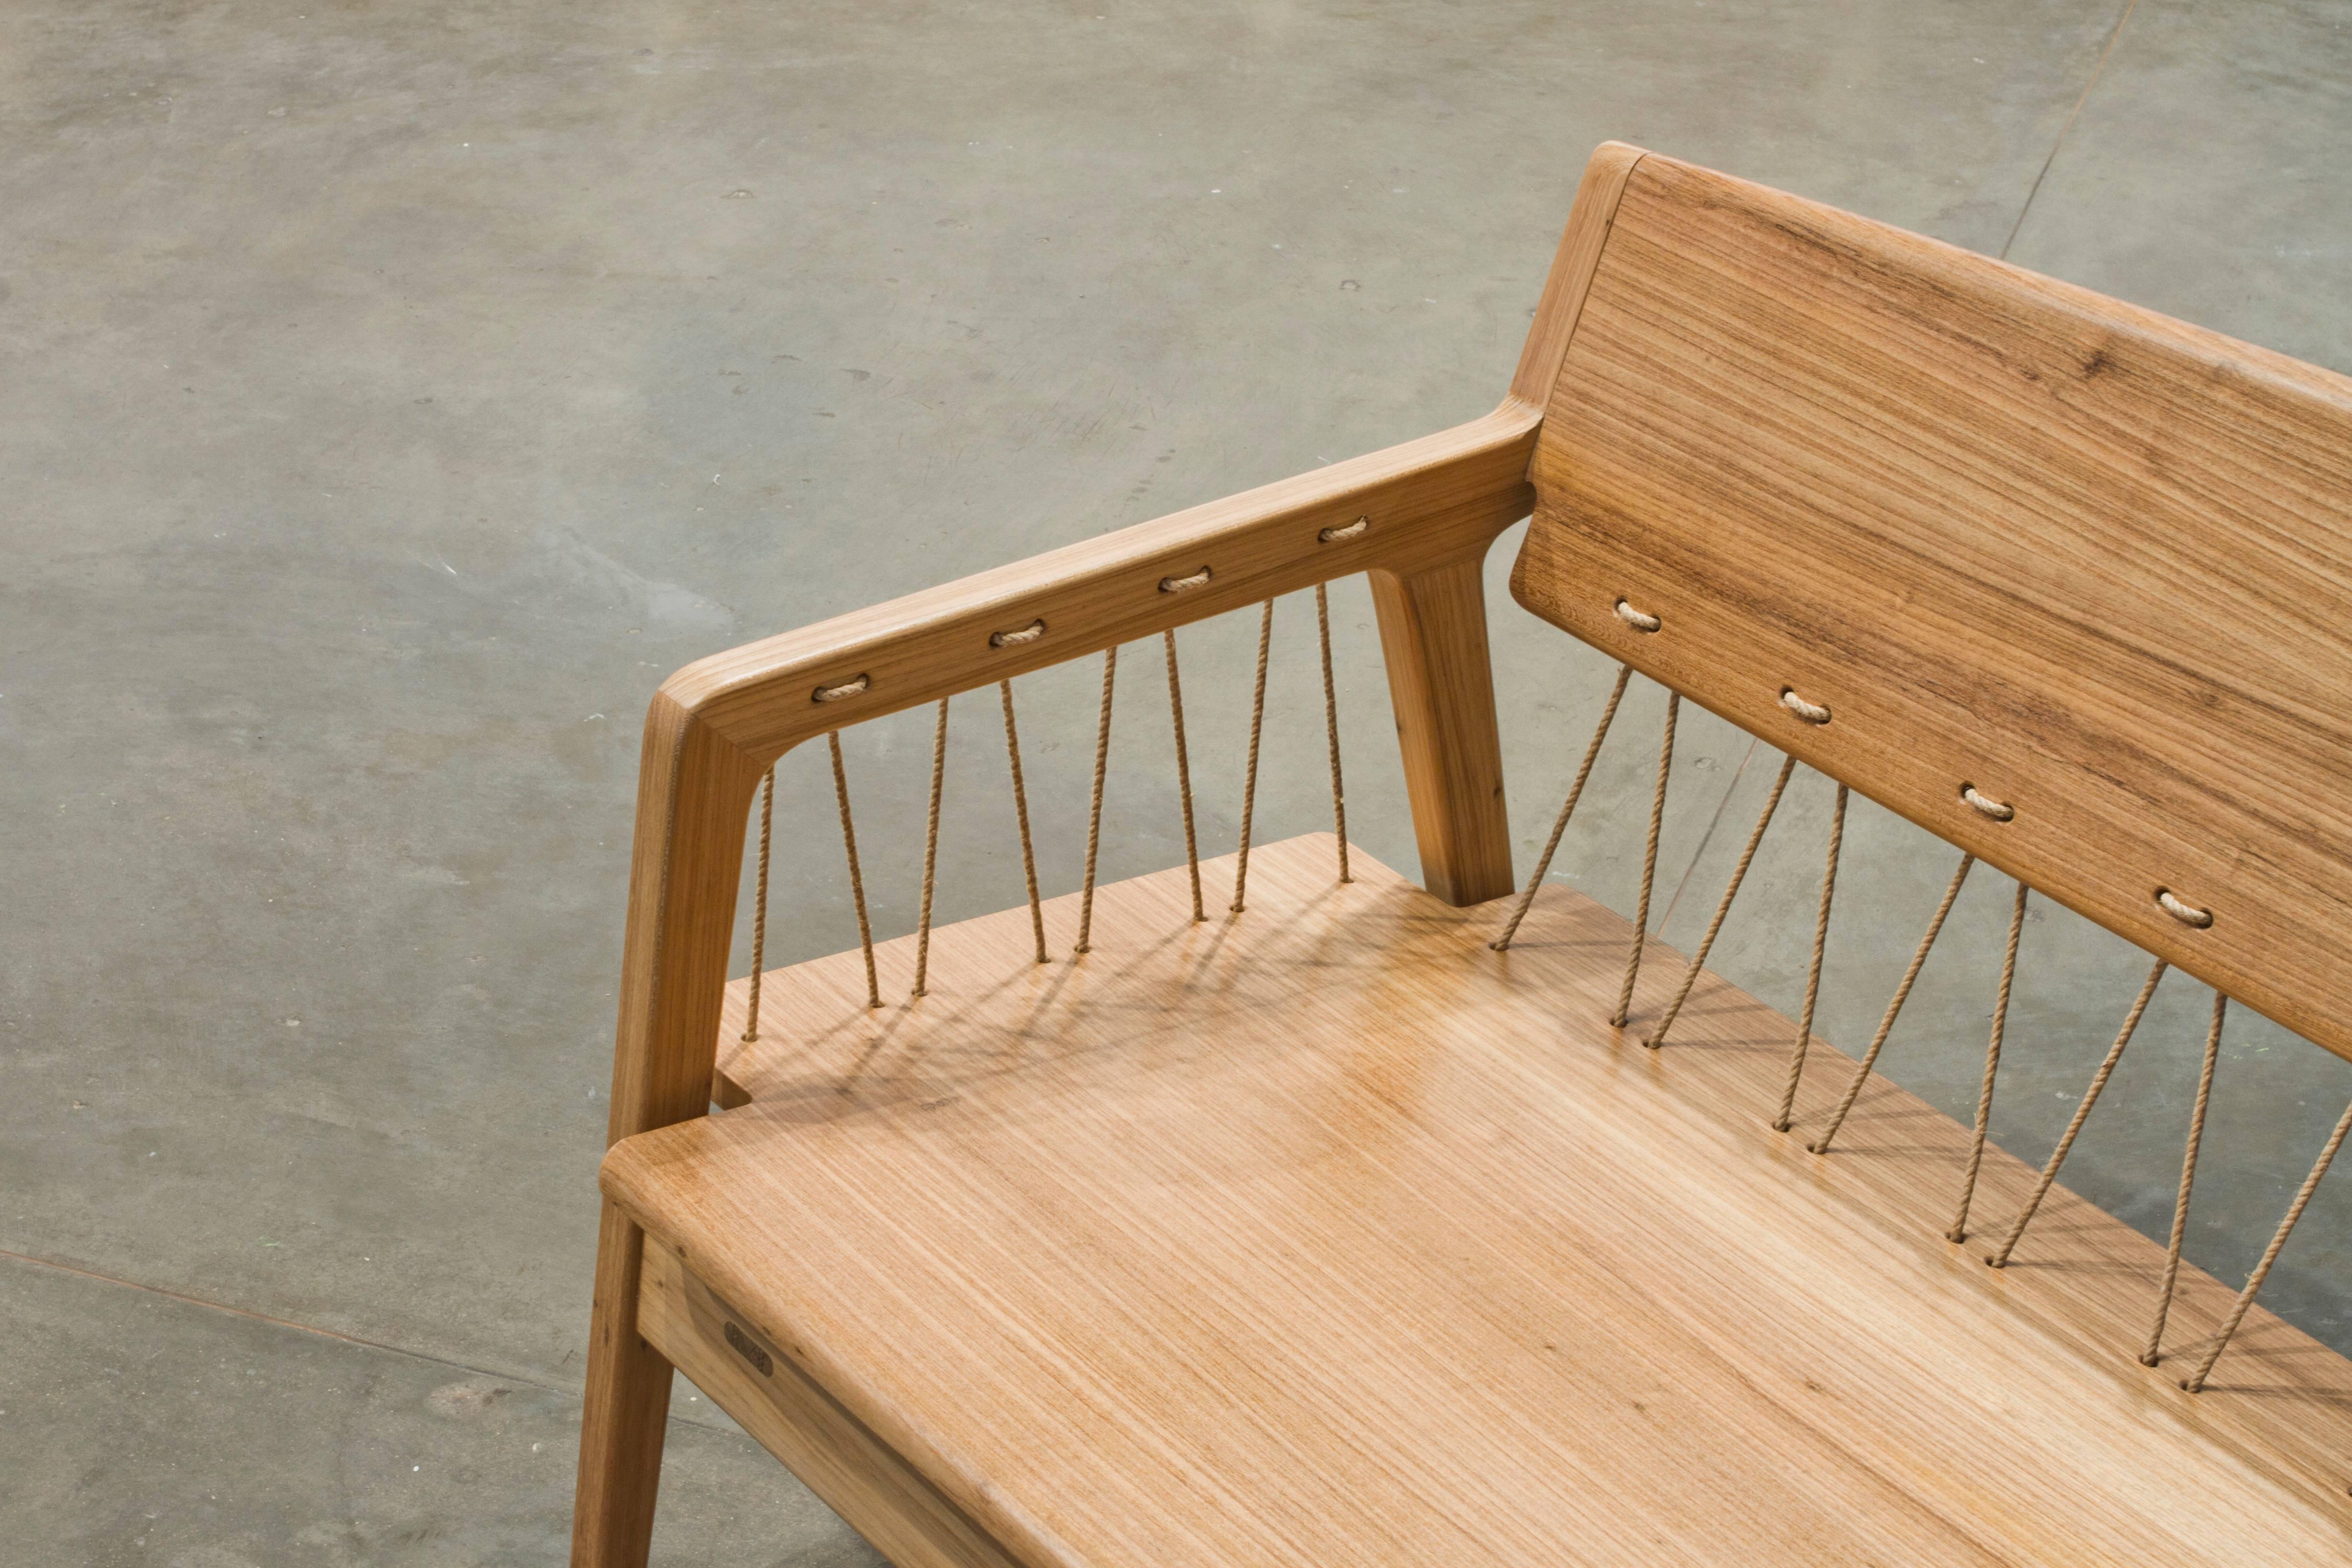 Brazilian Bench in Tropical Hardwood and Cord by Ricardo Graham Ferreira